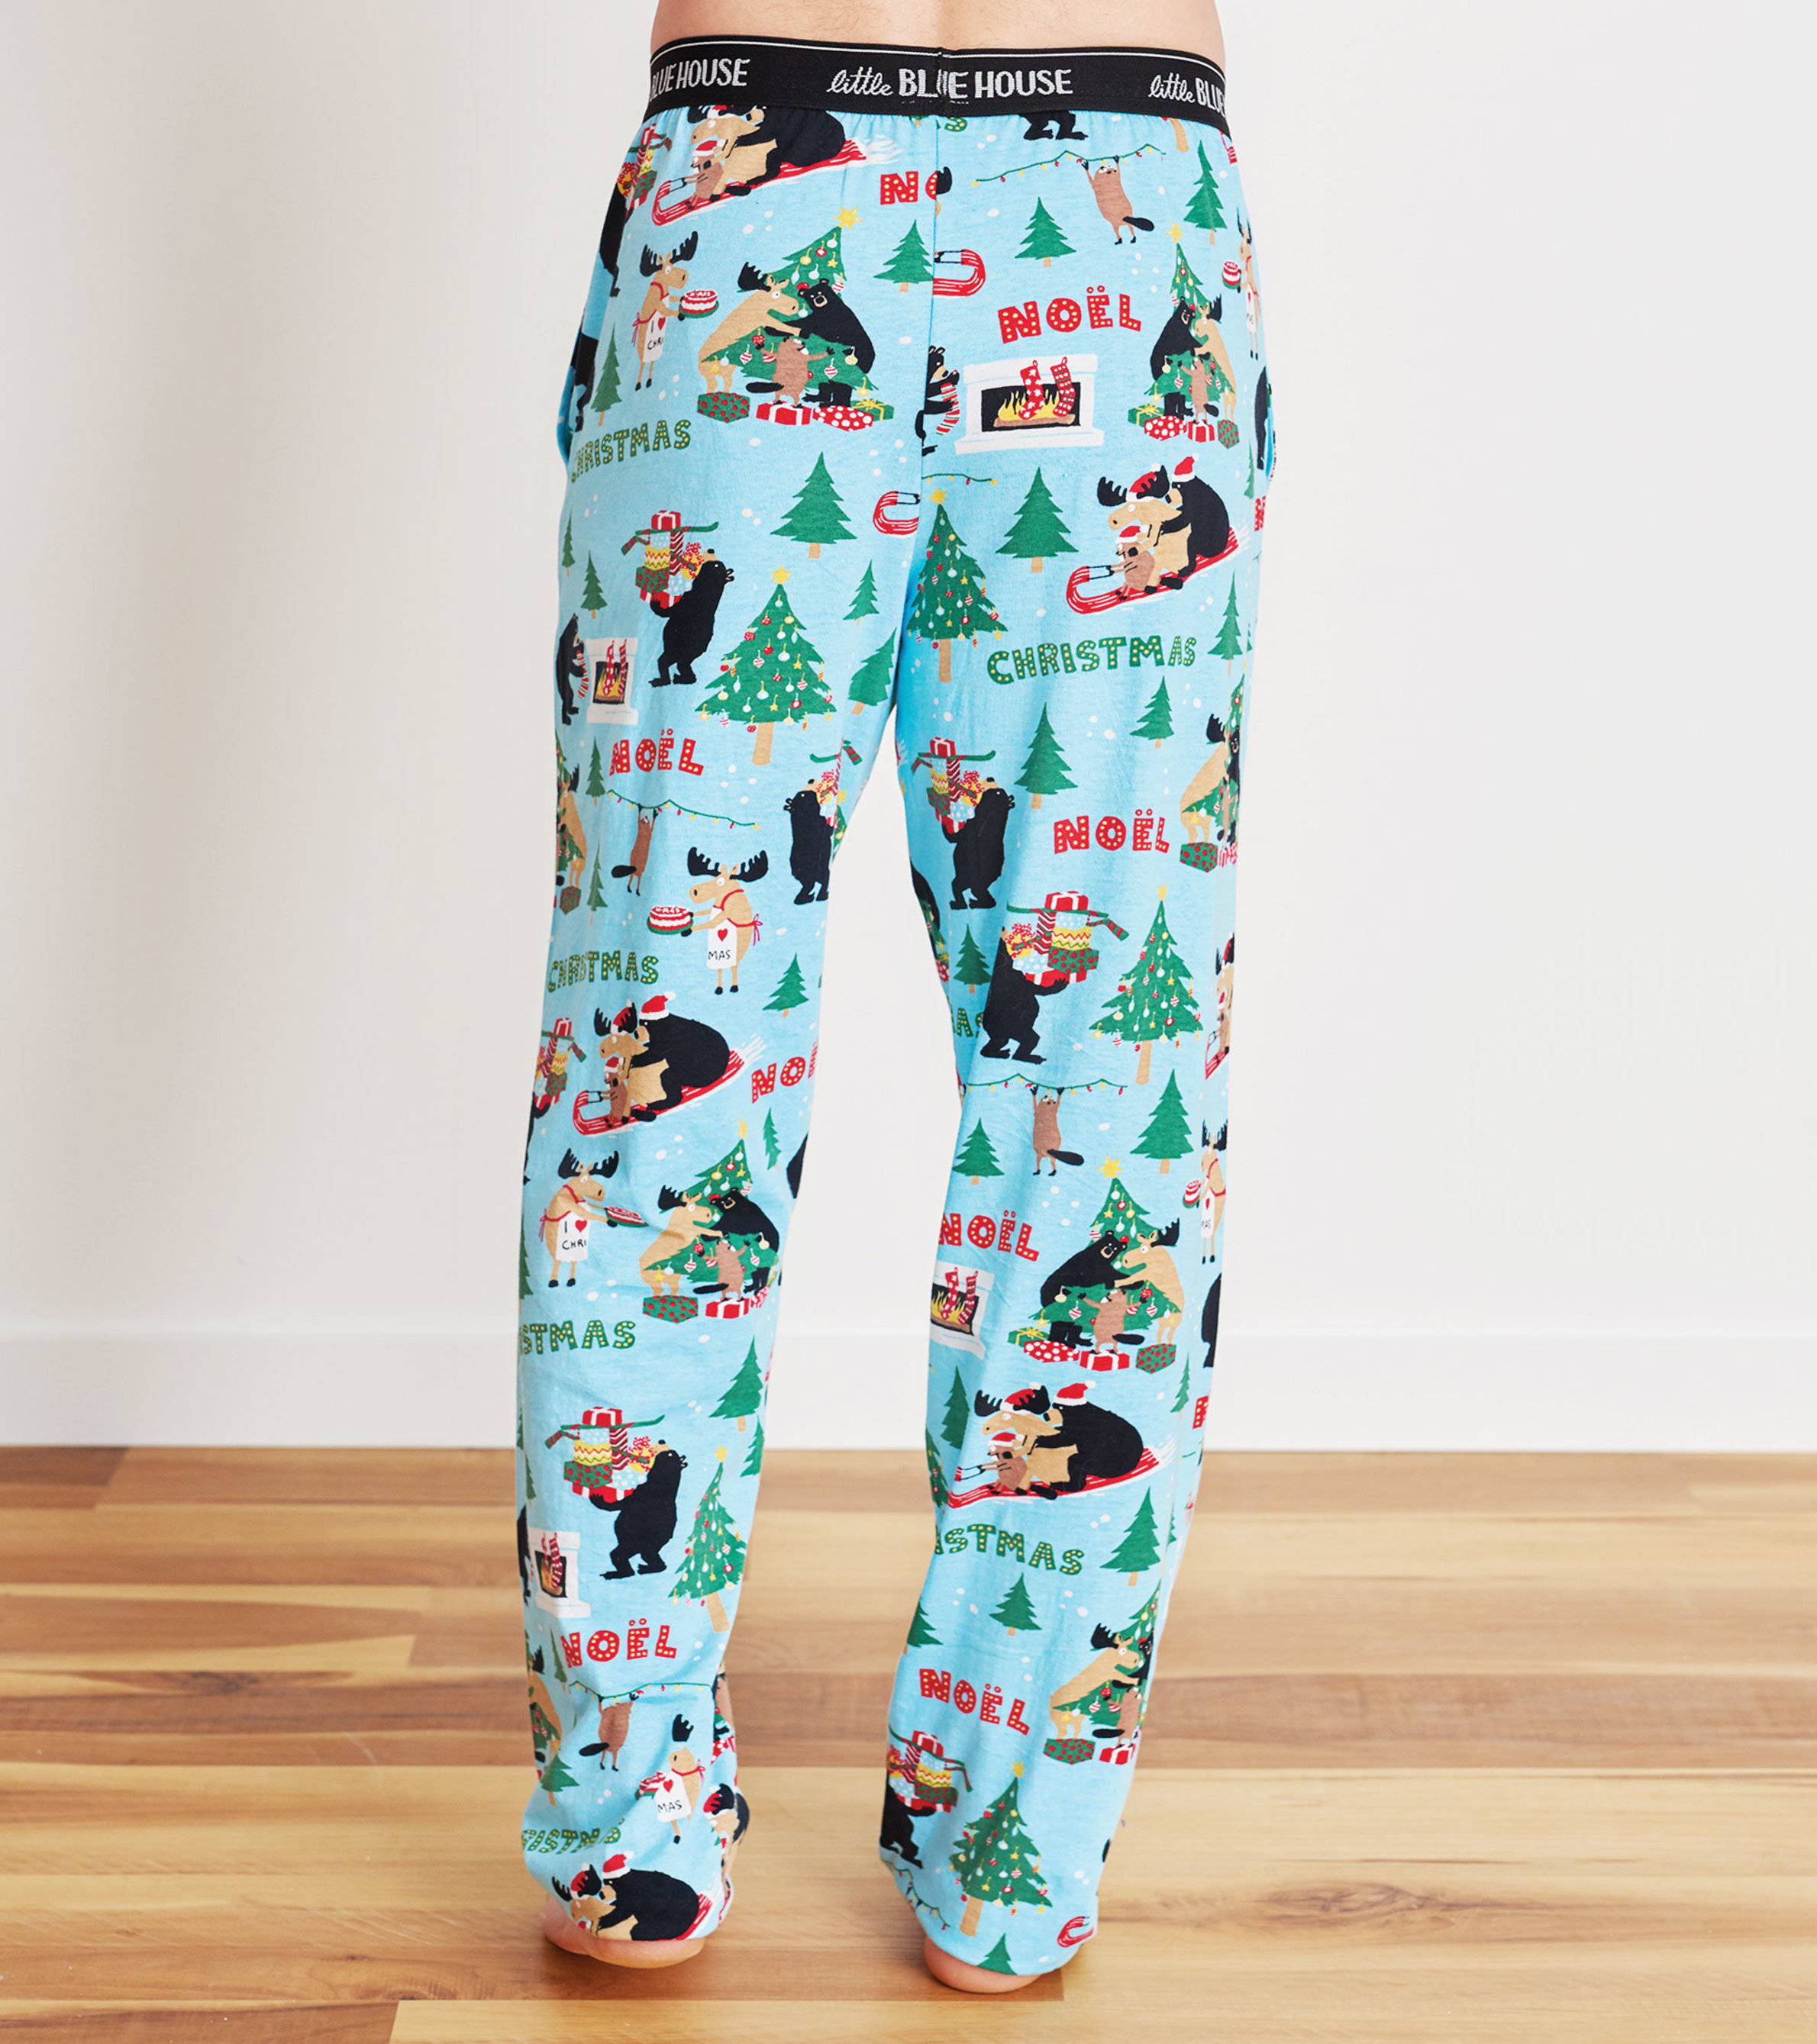 https://cdn.littlebluehouse.com/product_images/wild-about-christmas-mens-jersey-pajama-pants/PA4WILD004_A_jpg/pdp_zoom.jpg?c=1602694163&locale=us_en